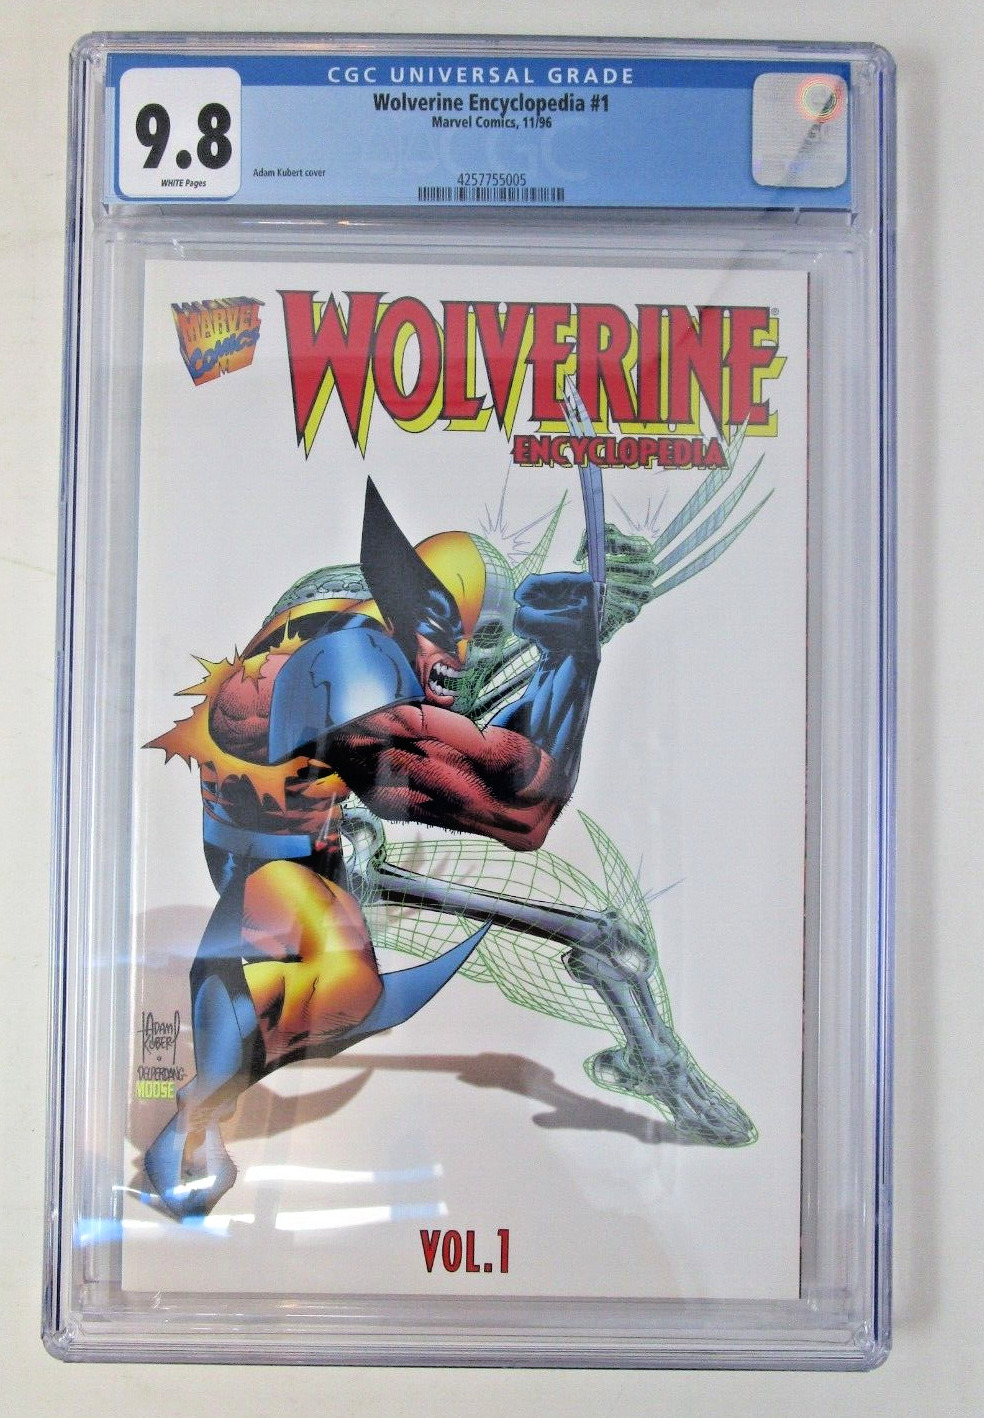 Wolverine Encyclopedia #1 1996 [CGC 9.8] Graded High Grade Hard to Find